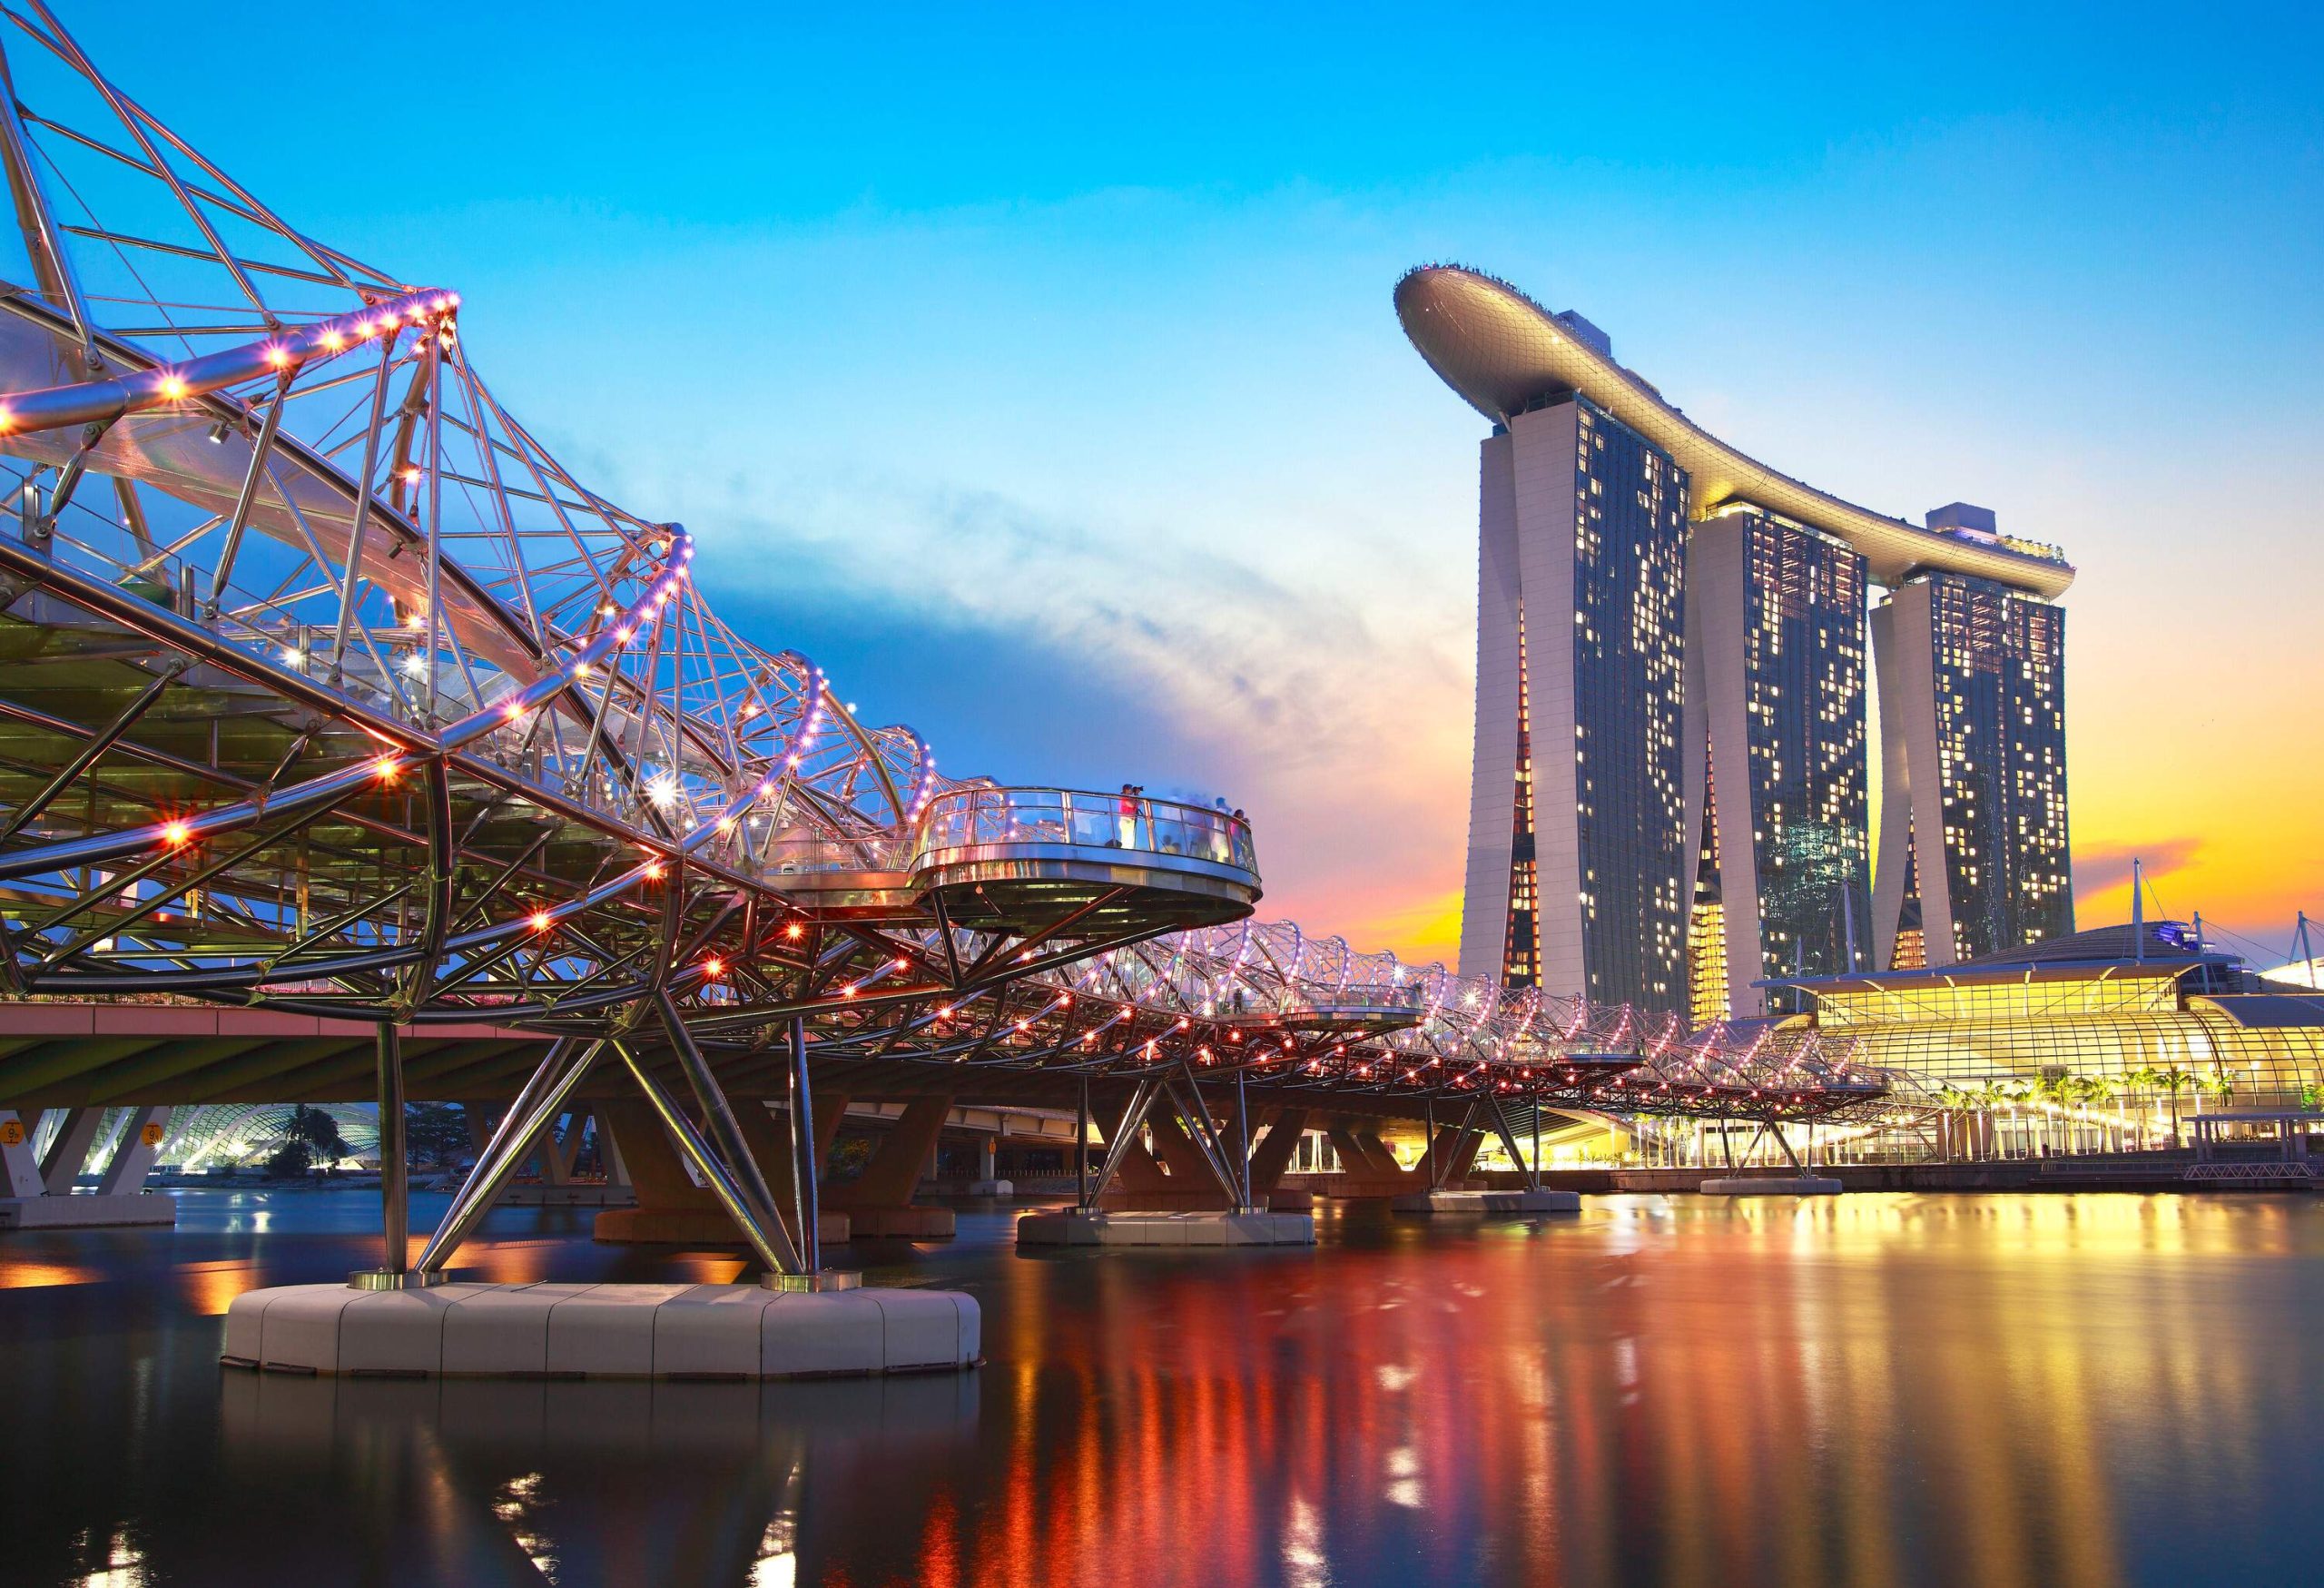 A steel footbridge over the bay inspired by the curved form of the structure of DNA and the brightly lit Marina Bay.